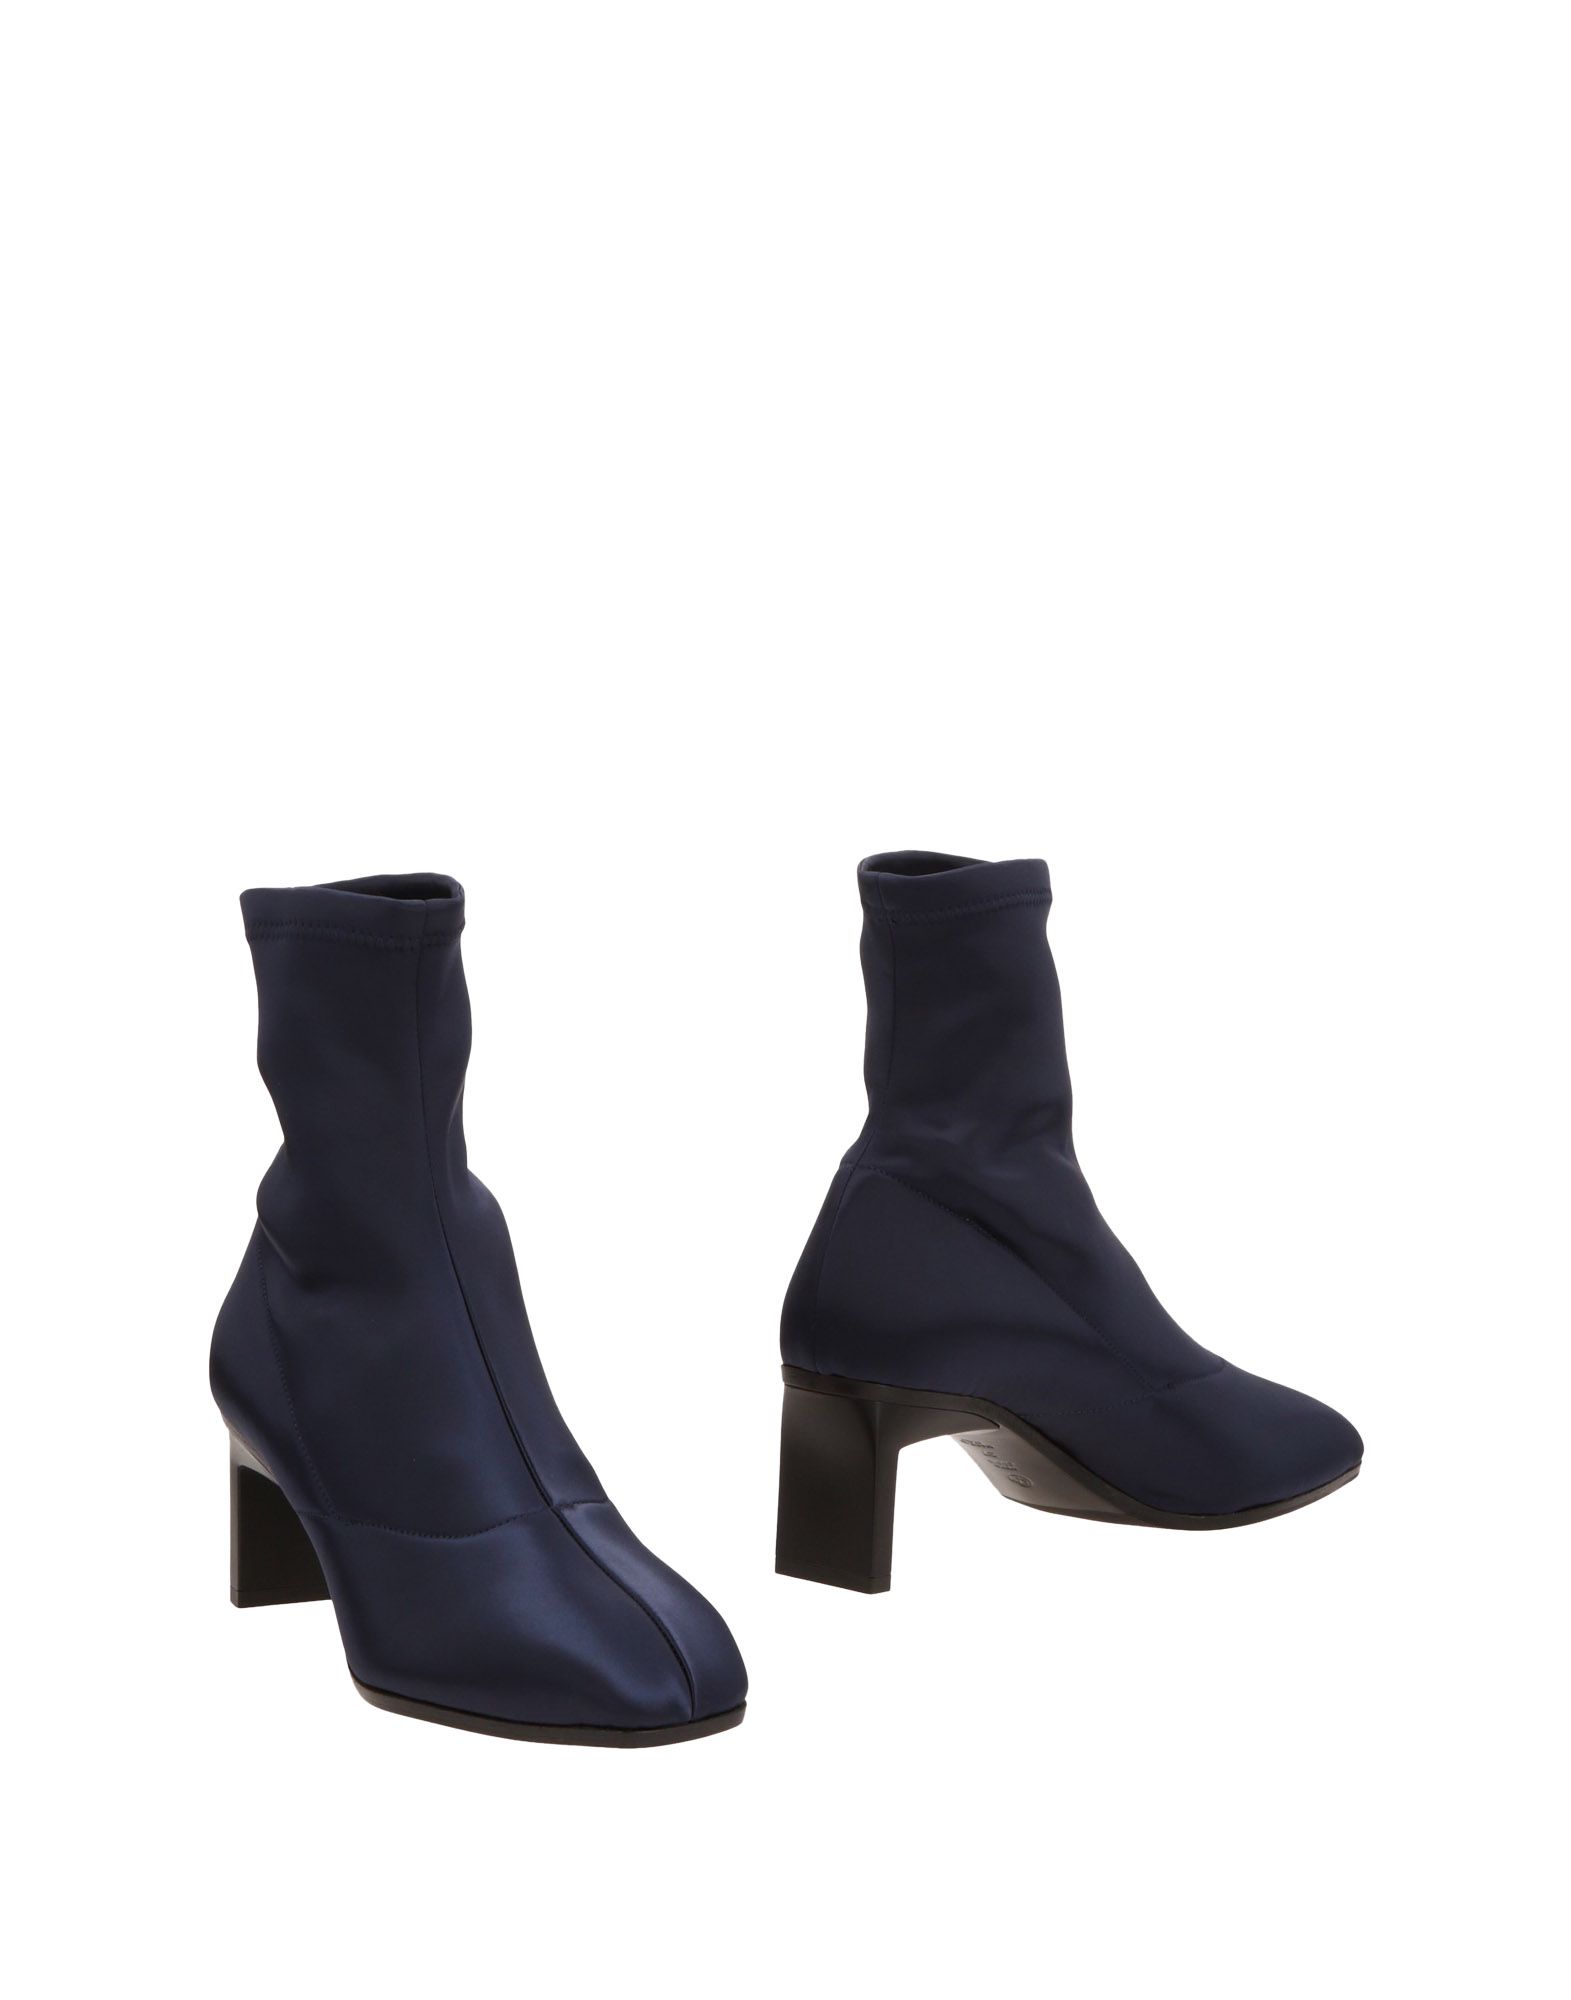 3.1 PHILLIP LIM Ankle boot,11460113DS 13